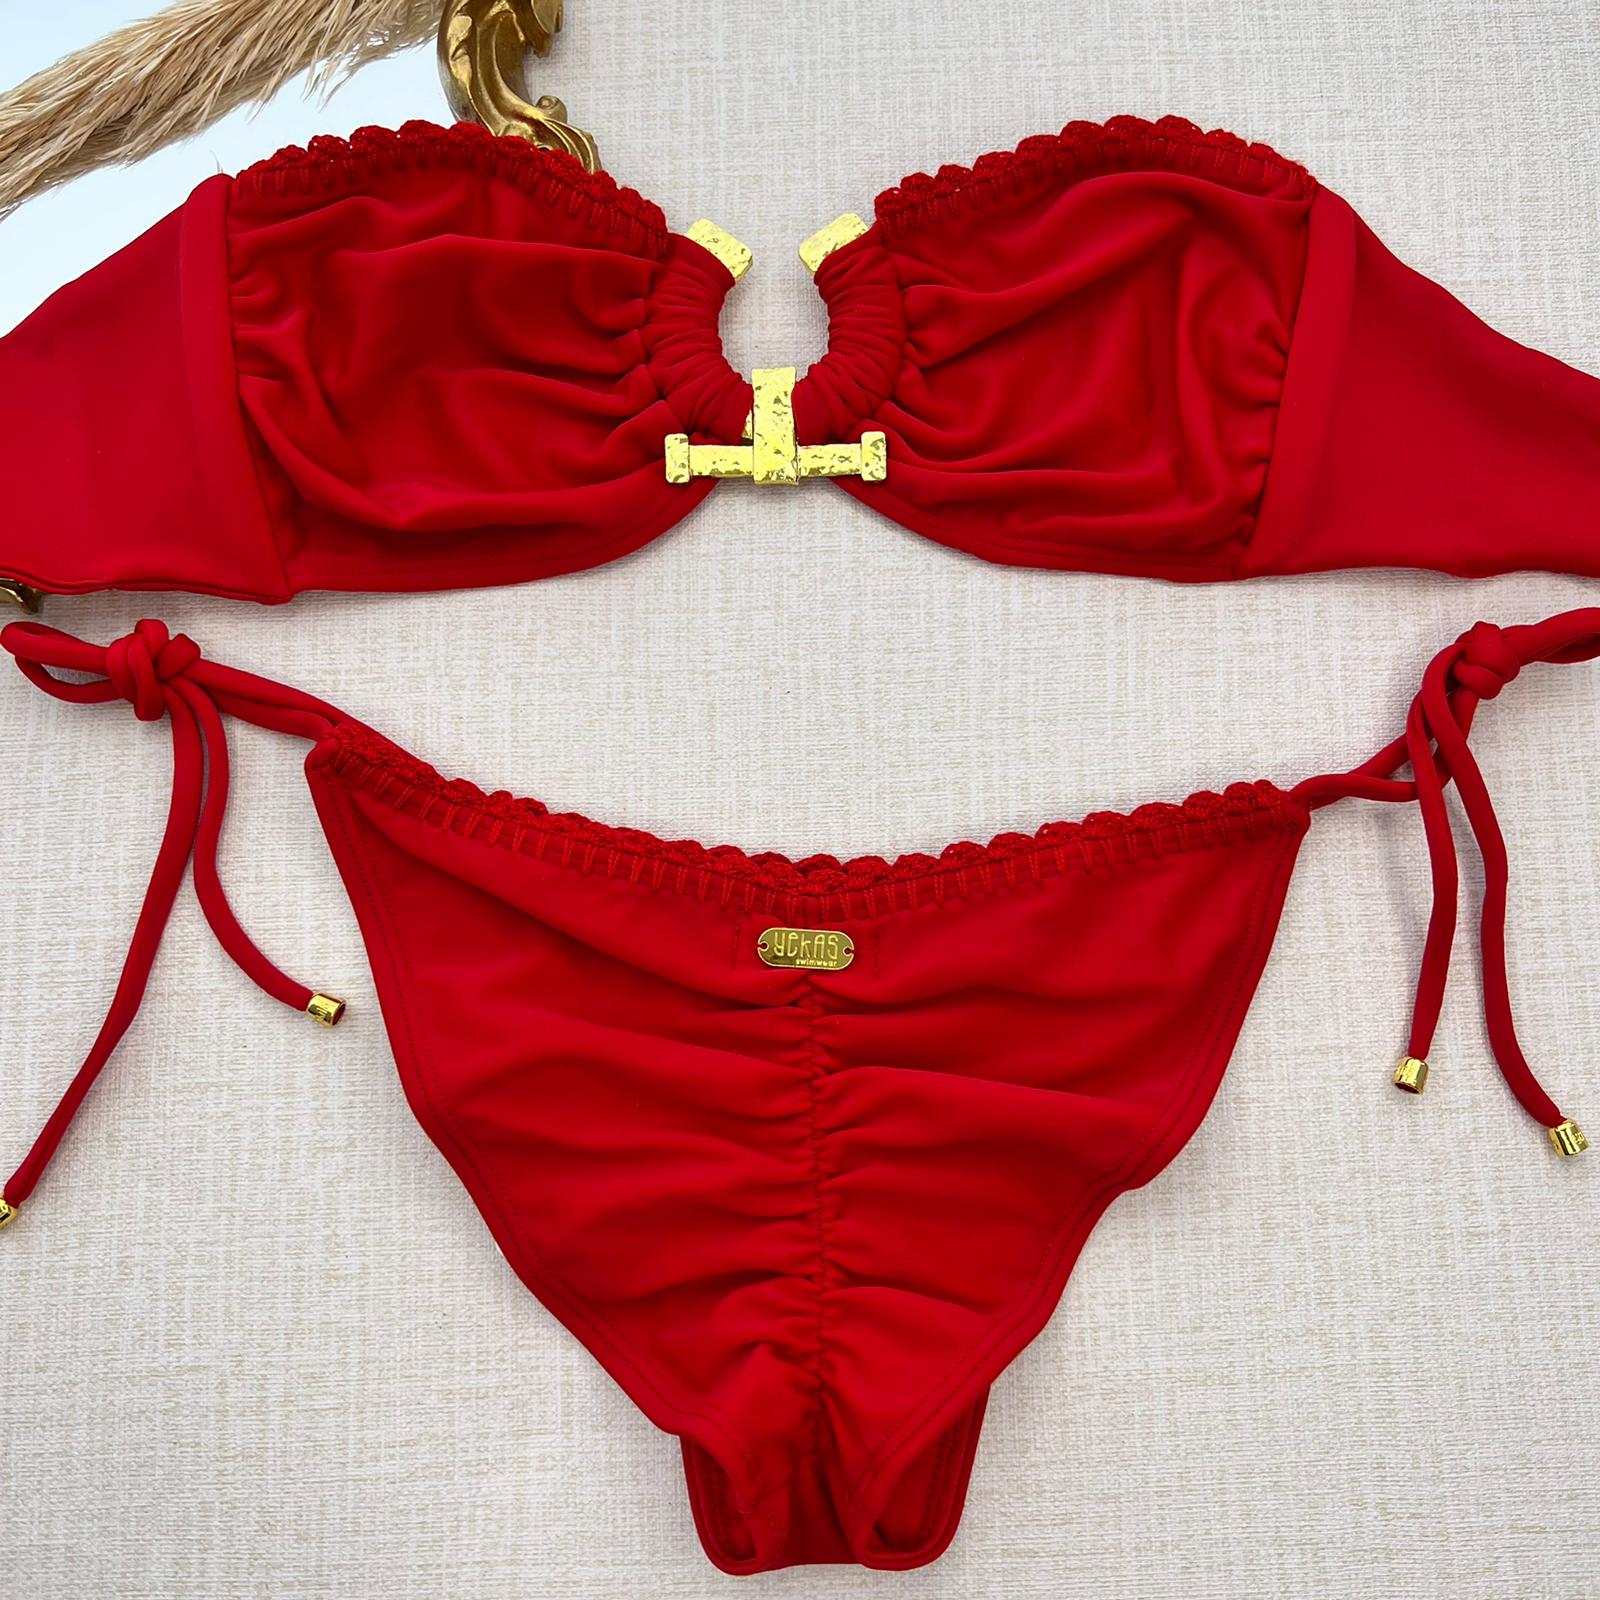 Yekas - Formentera Ajust Red Two Pieces